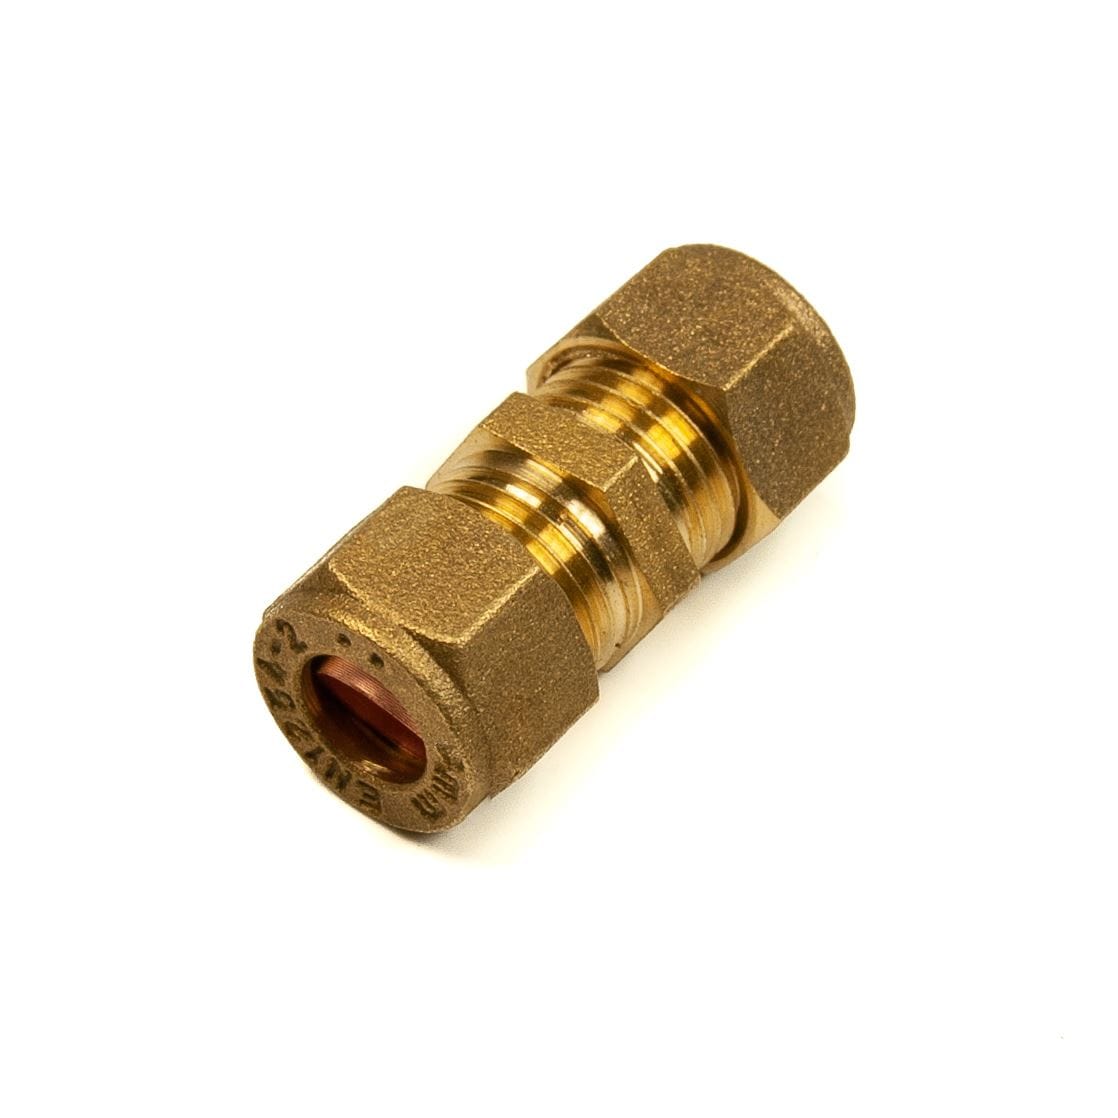 10mm Compression Straight Coupling Brass Compression Couplings Thunderfix 100020